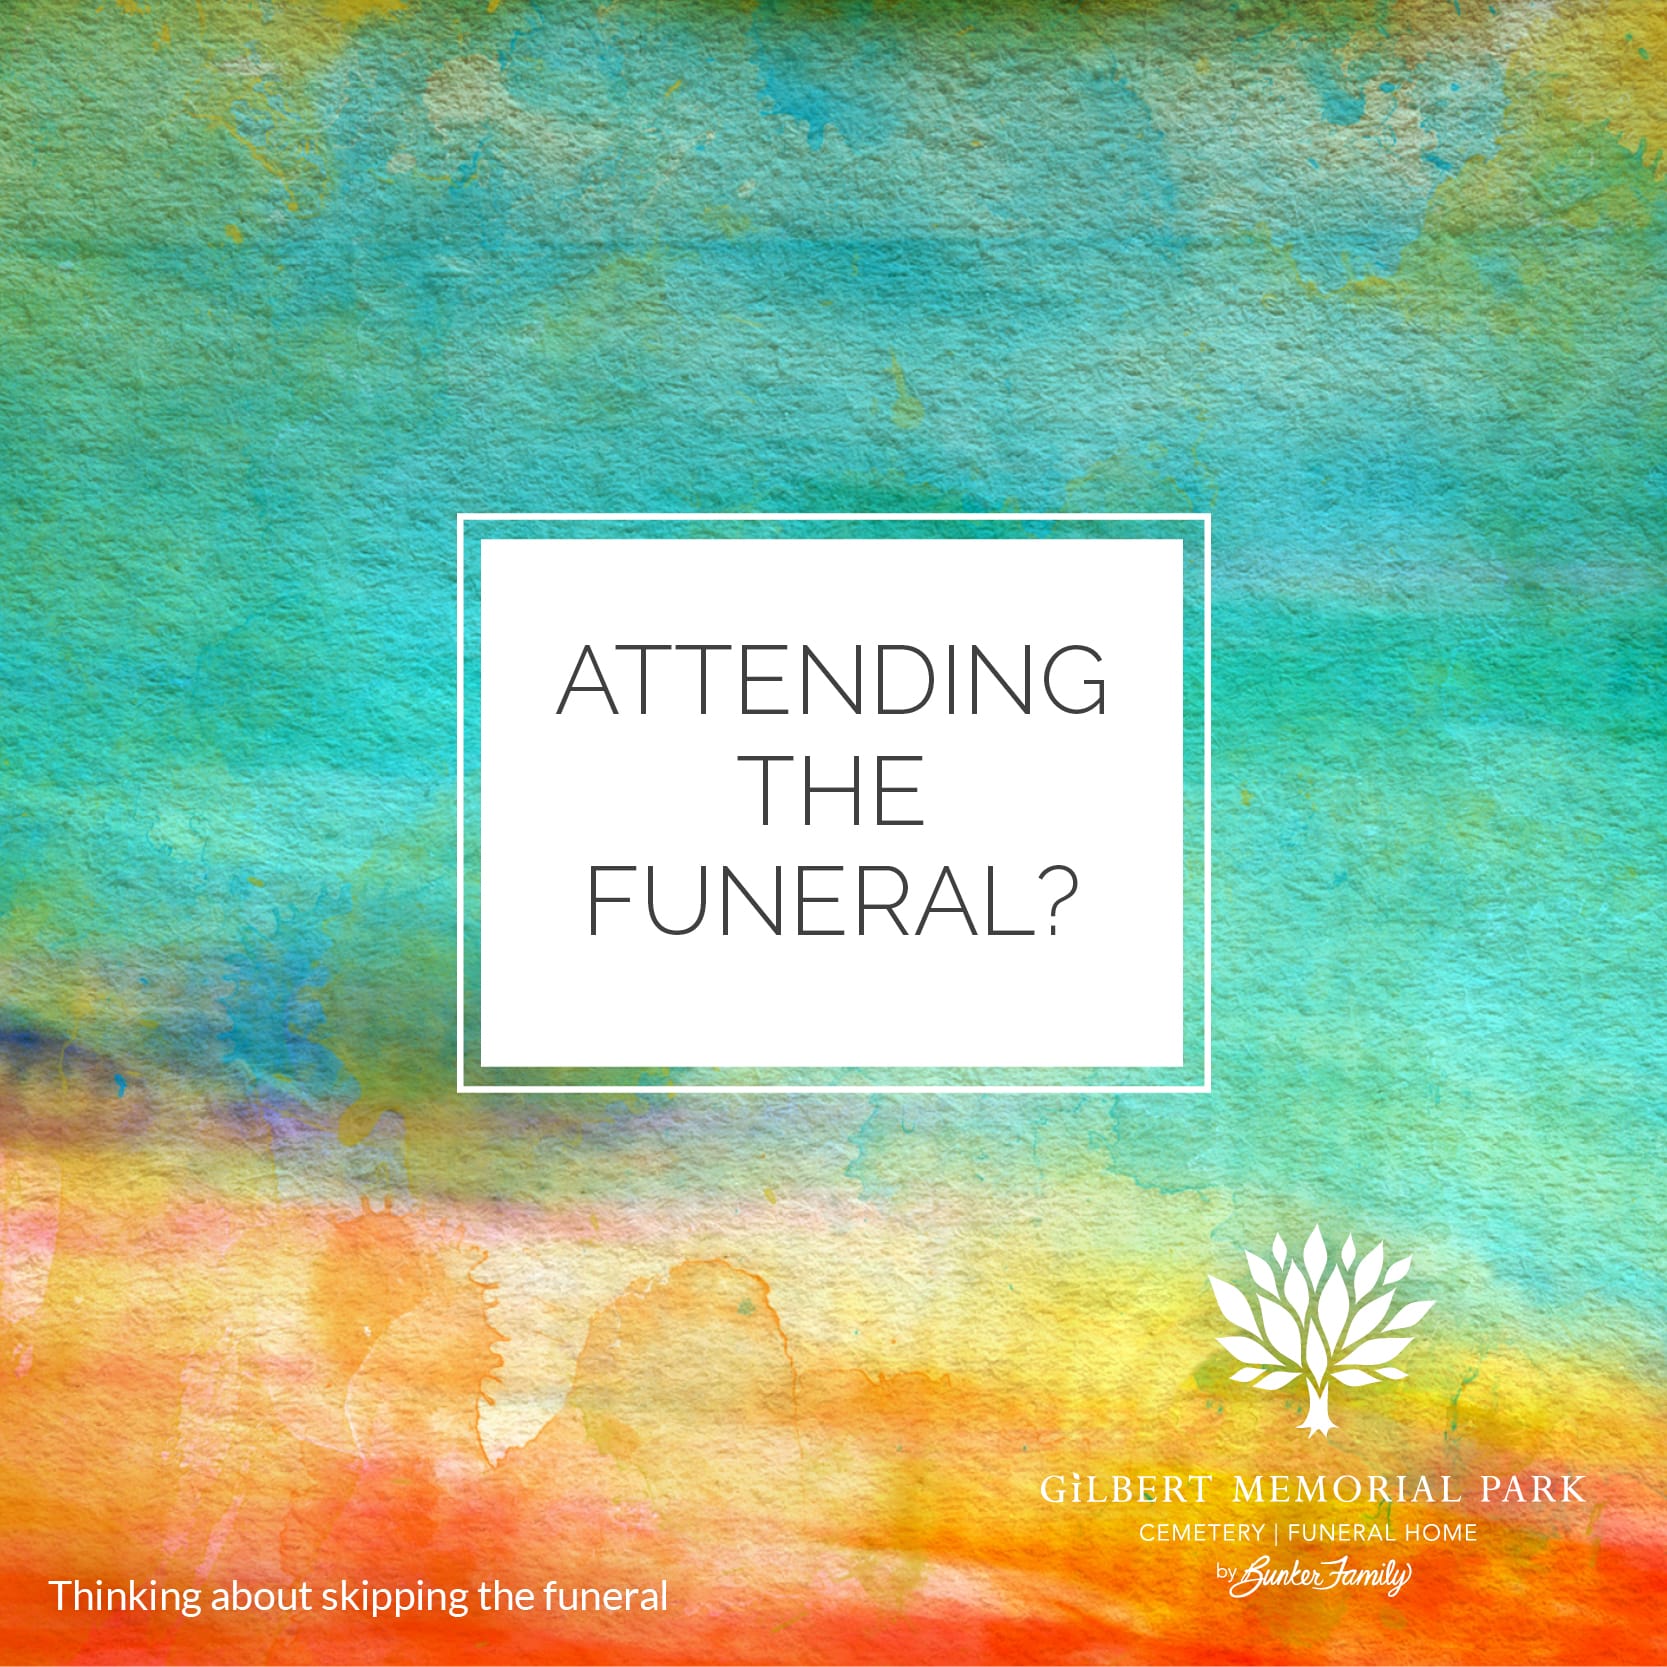 Thinking About Skipping the Funeral?